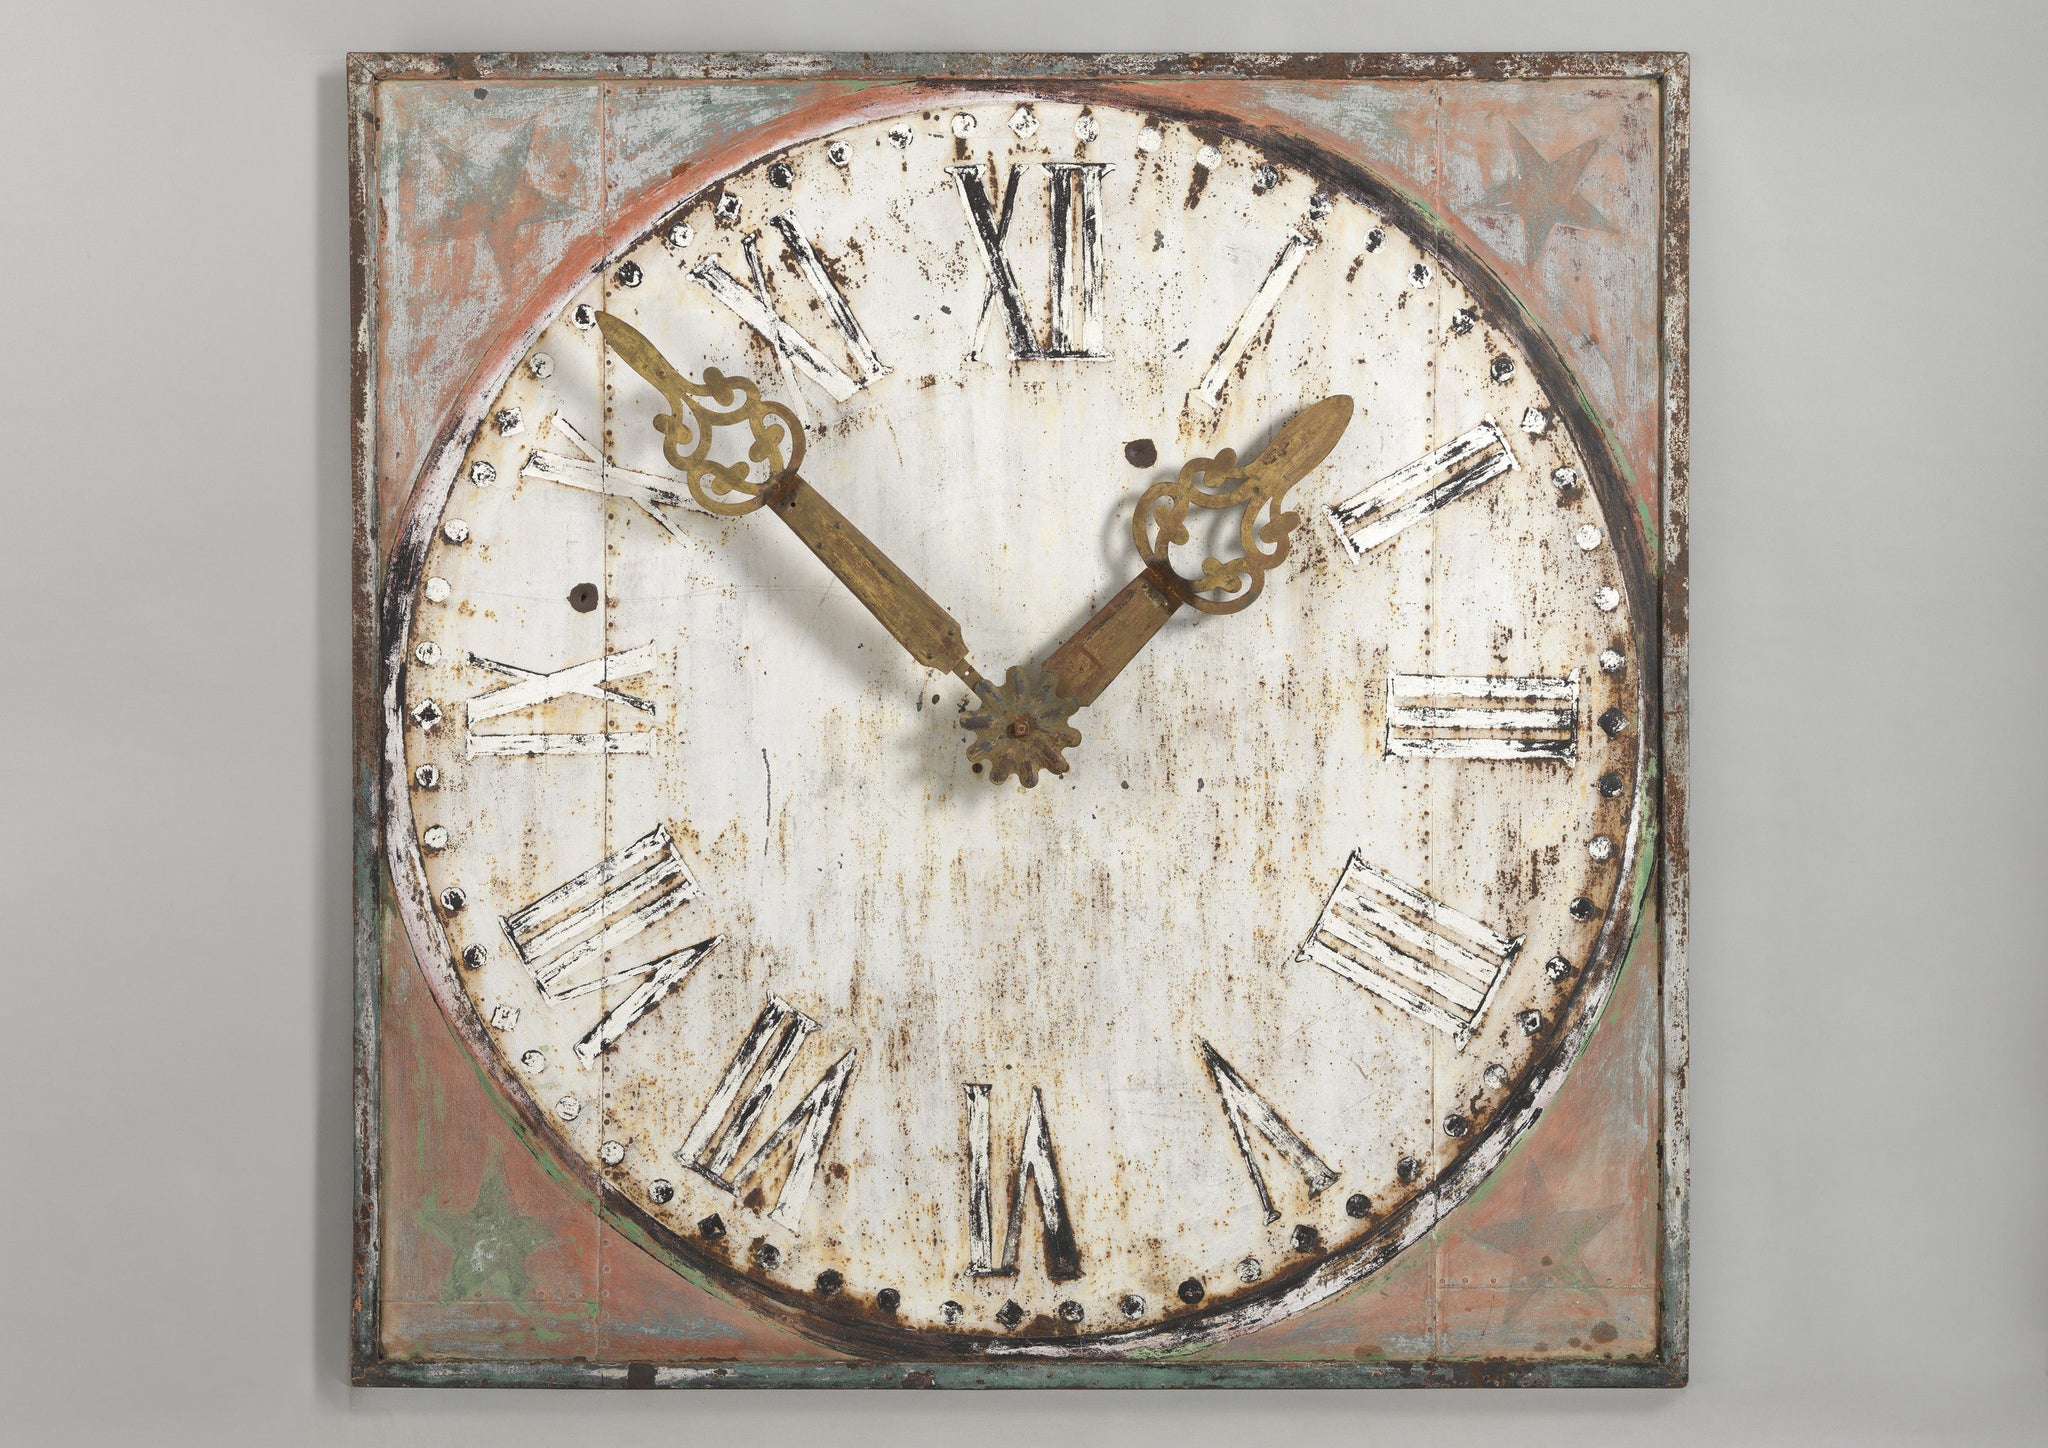 Monumental Architectural Clock Face